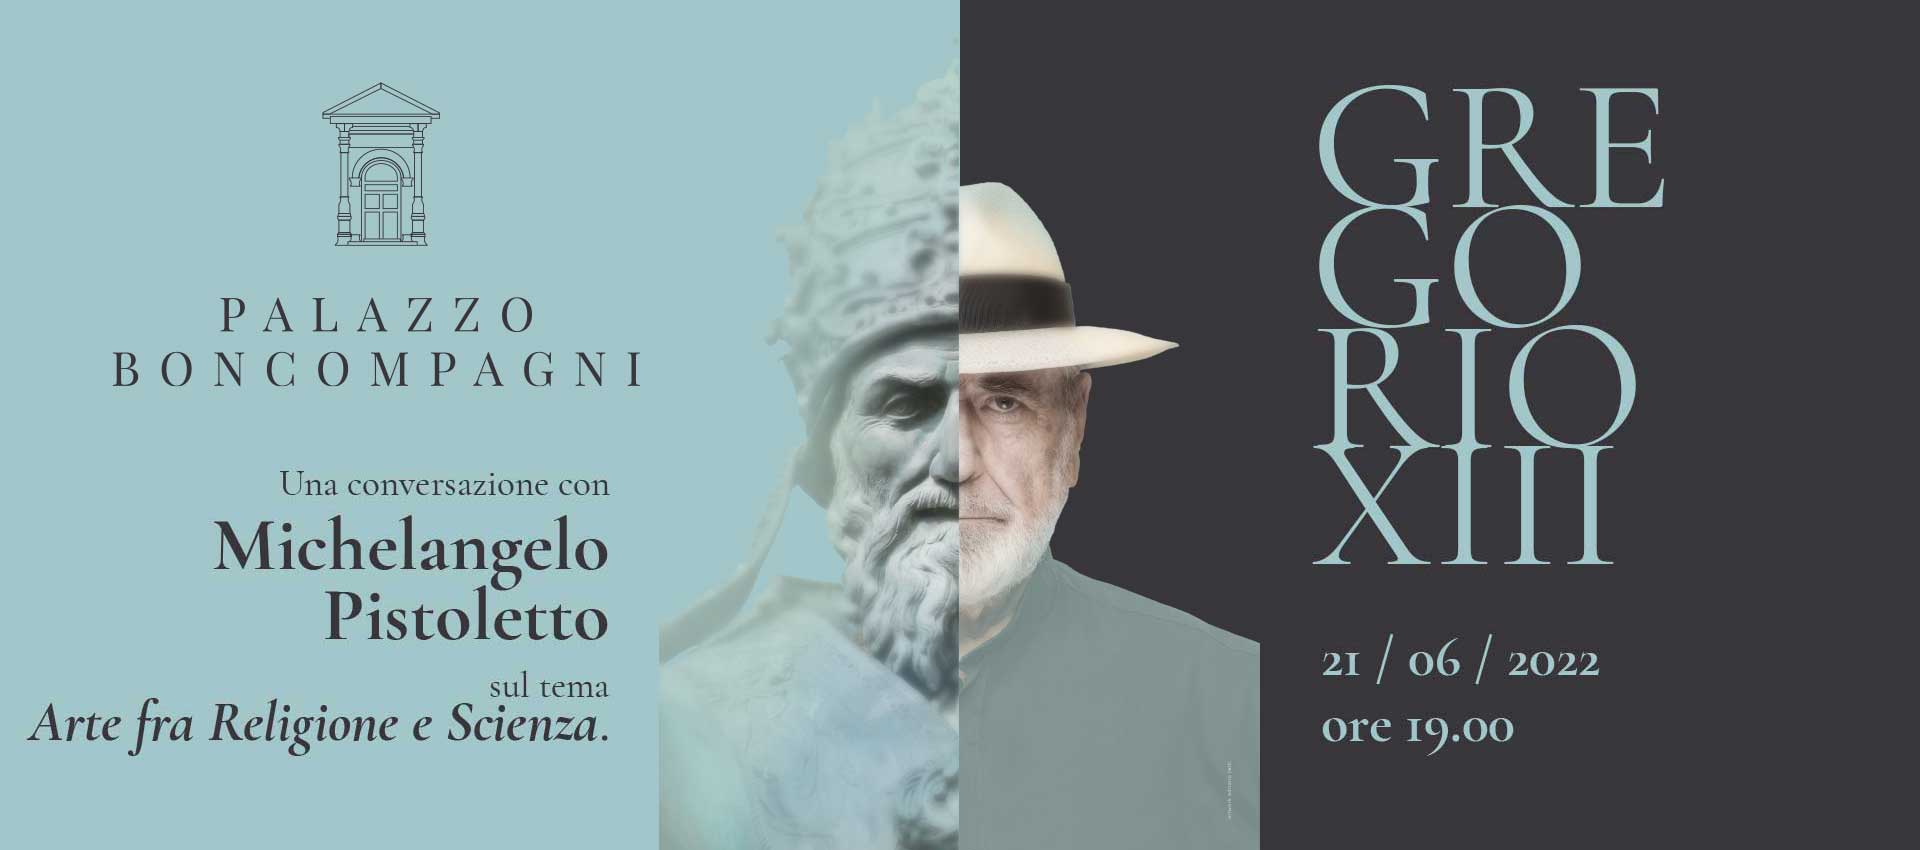 <p>June 21st 2022</p>
<h2>Michelangelo Pistoletto<br />
for the 450 years<br />
of Pope Gregory XIII<br />
</h2>
